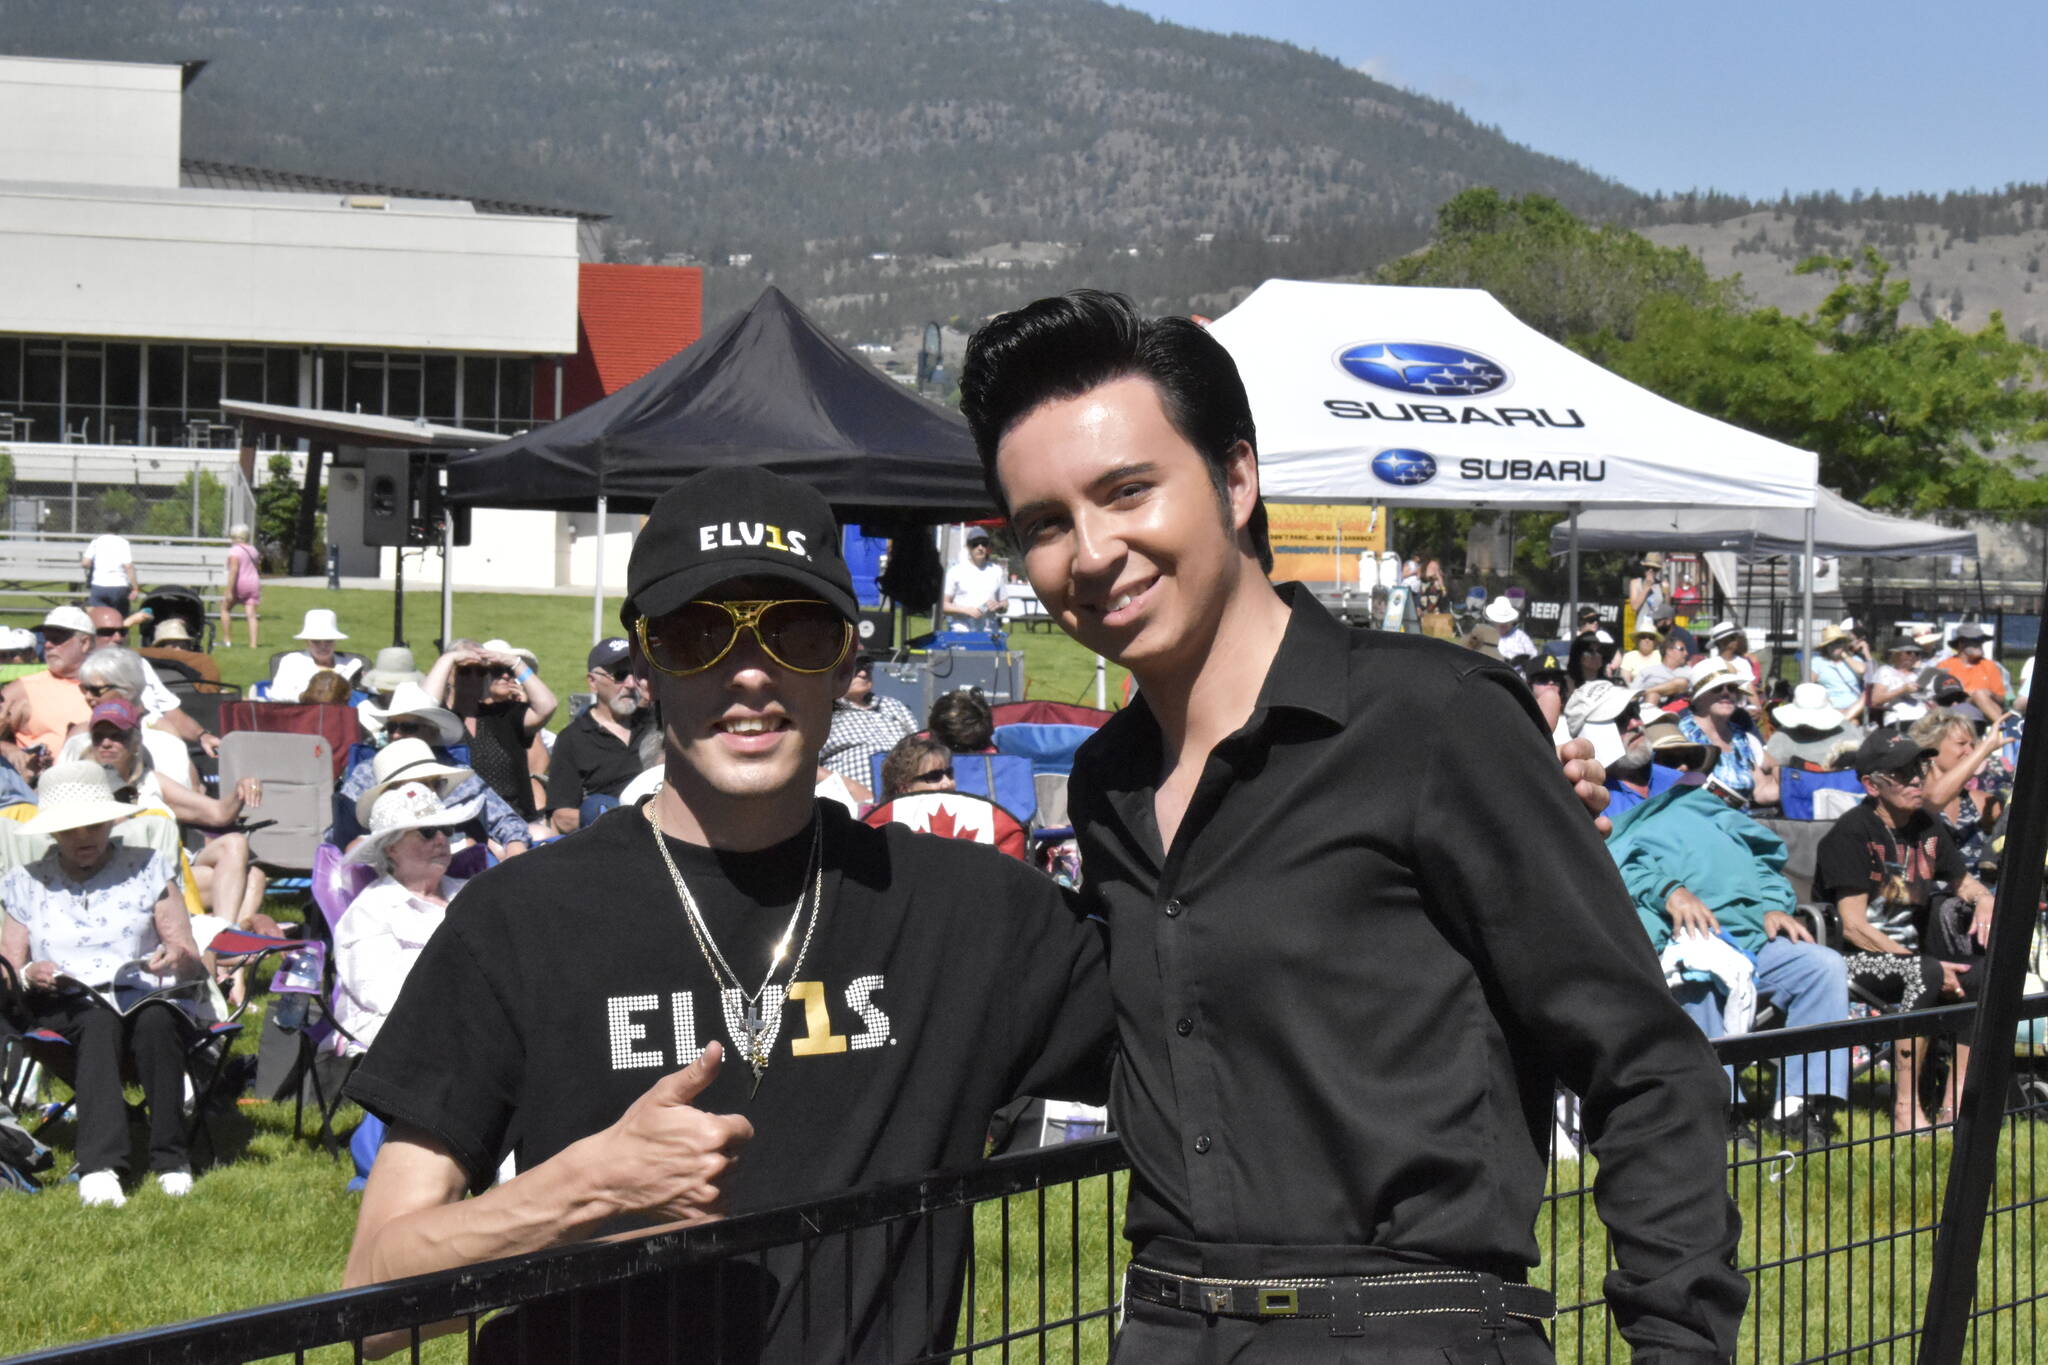 The festival’s youngest performer joined by an Elvis Presley fanatic at Okanagan Lake Park in Penticton in June 2022. (Logan Lockhart-Western News)